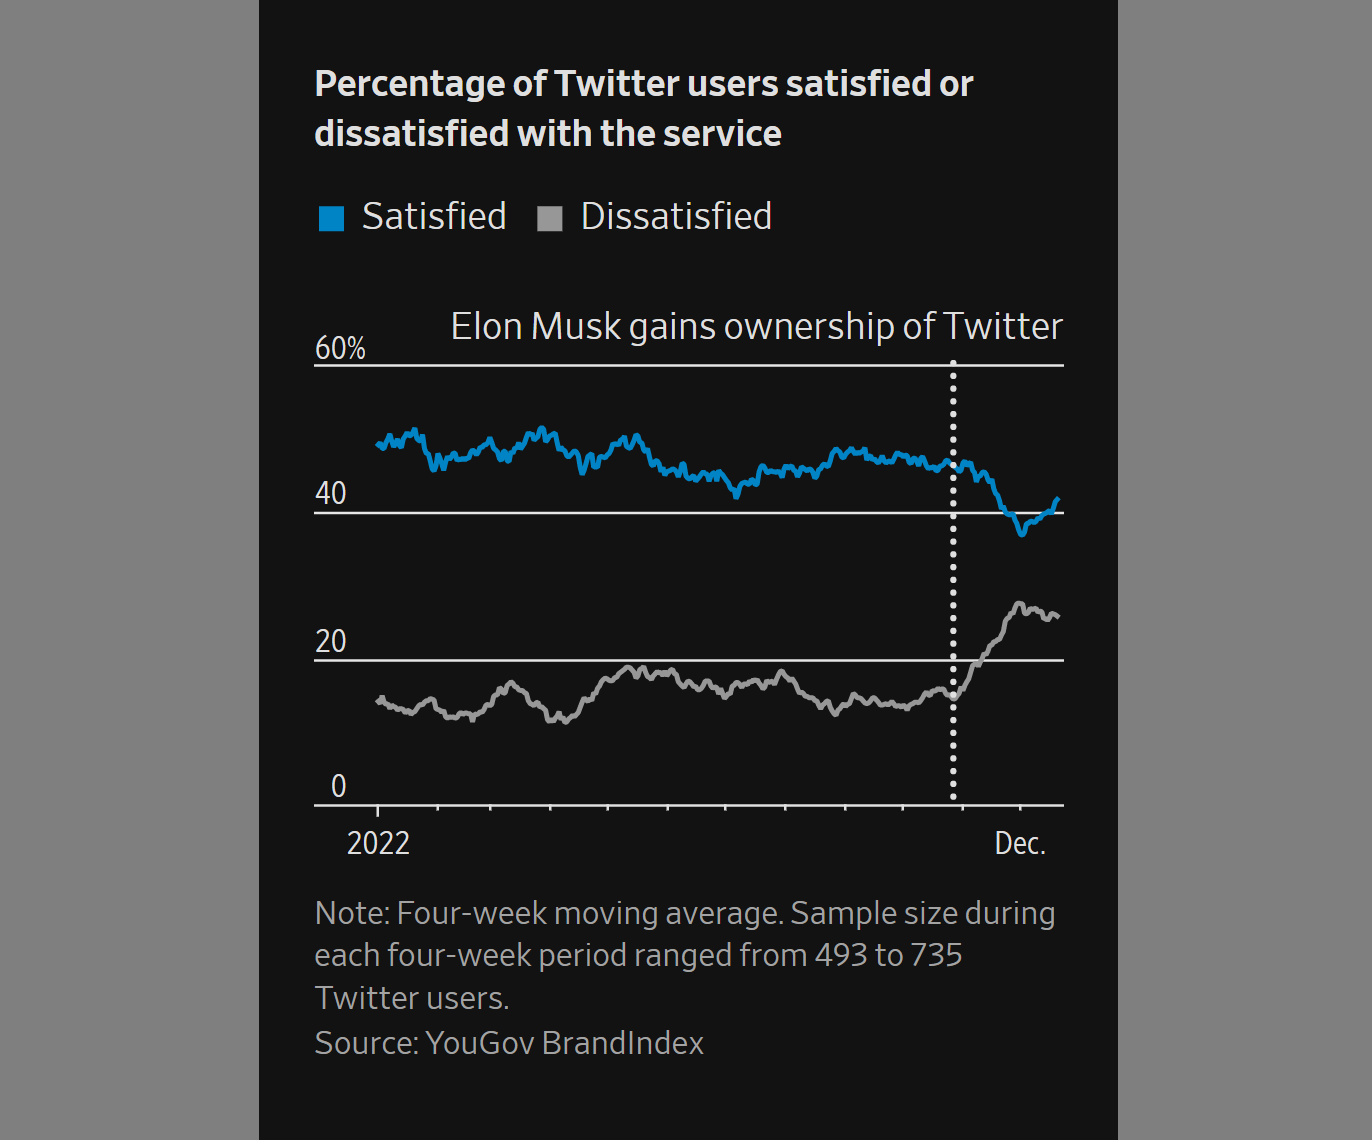 Nom : percentage-of-twitter-users-satisfied-or-dissatisfied-with-the-service.png
Affichages : 953
Taille : 97,7 Ko